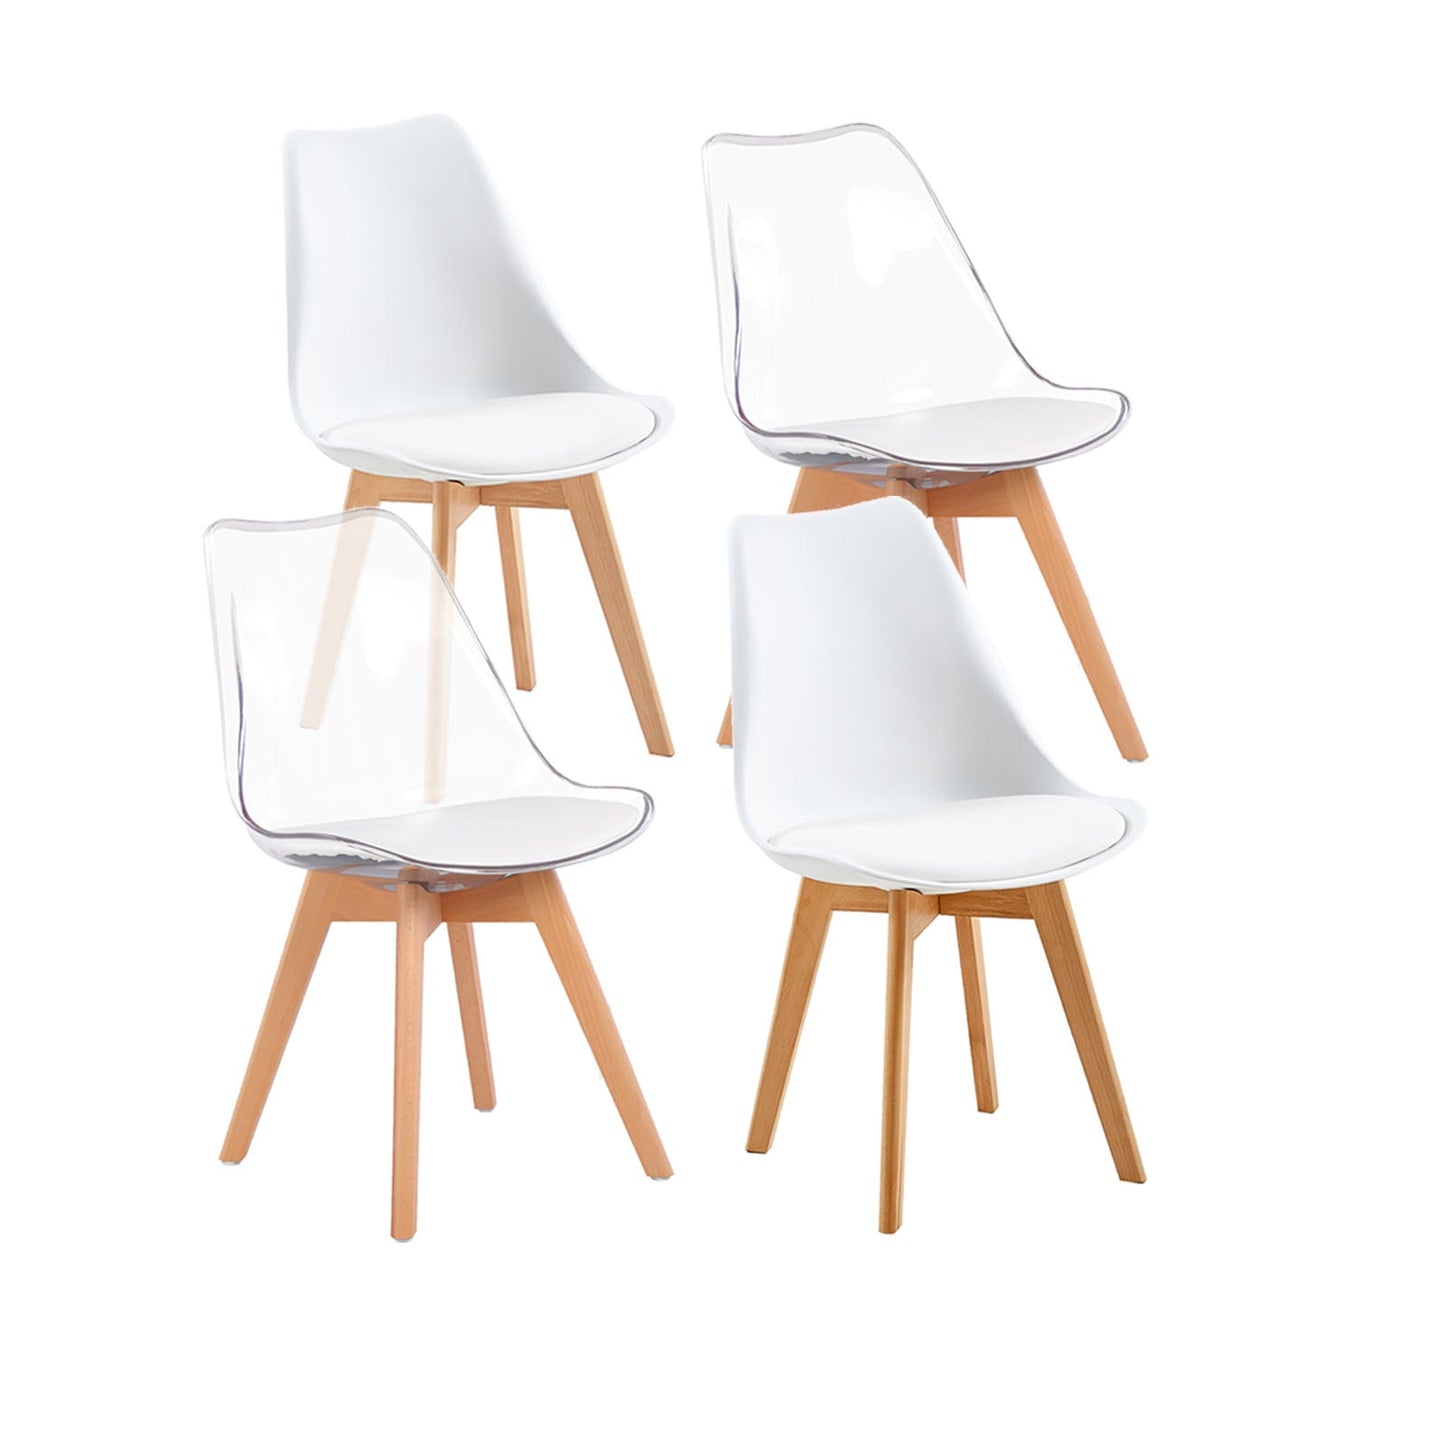 TULIP PP Dining Chairs with Beech Legs Scandinavian design Upholstered Chairs - White and Transparent